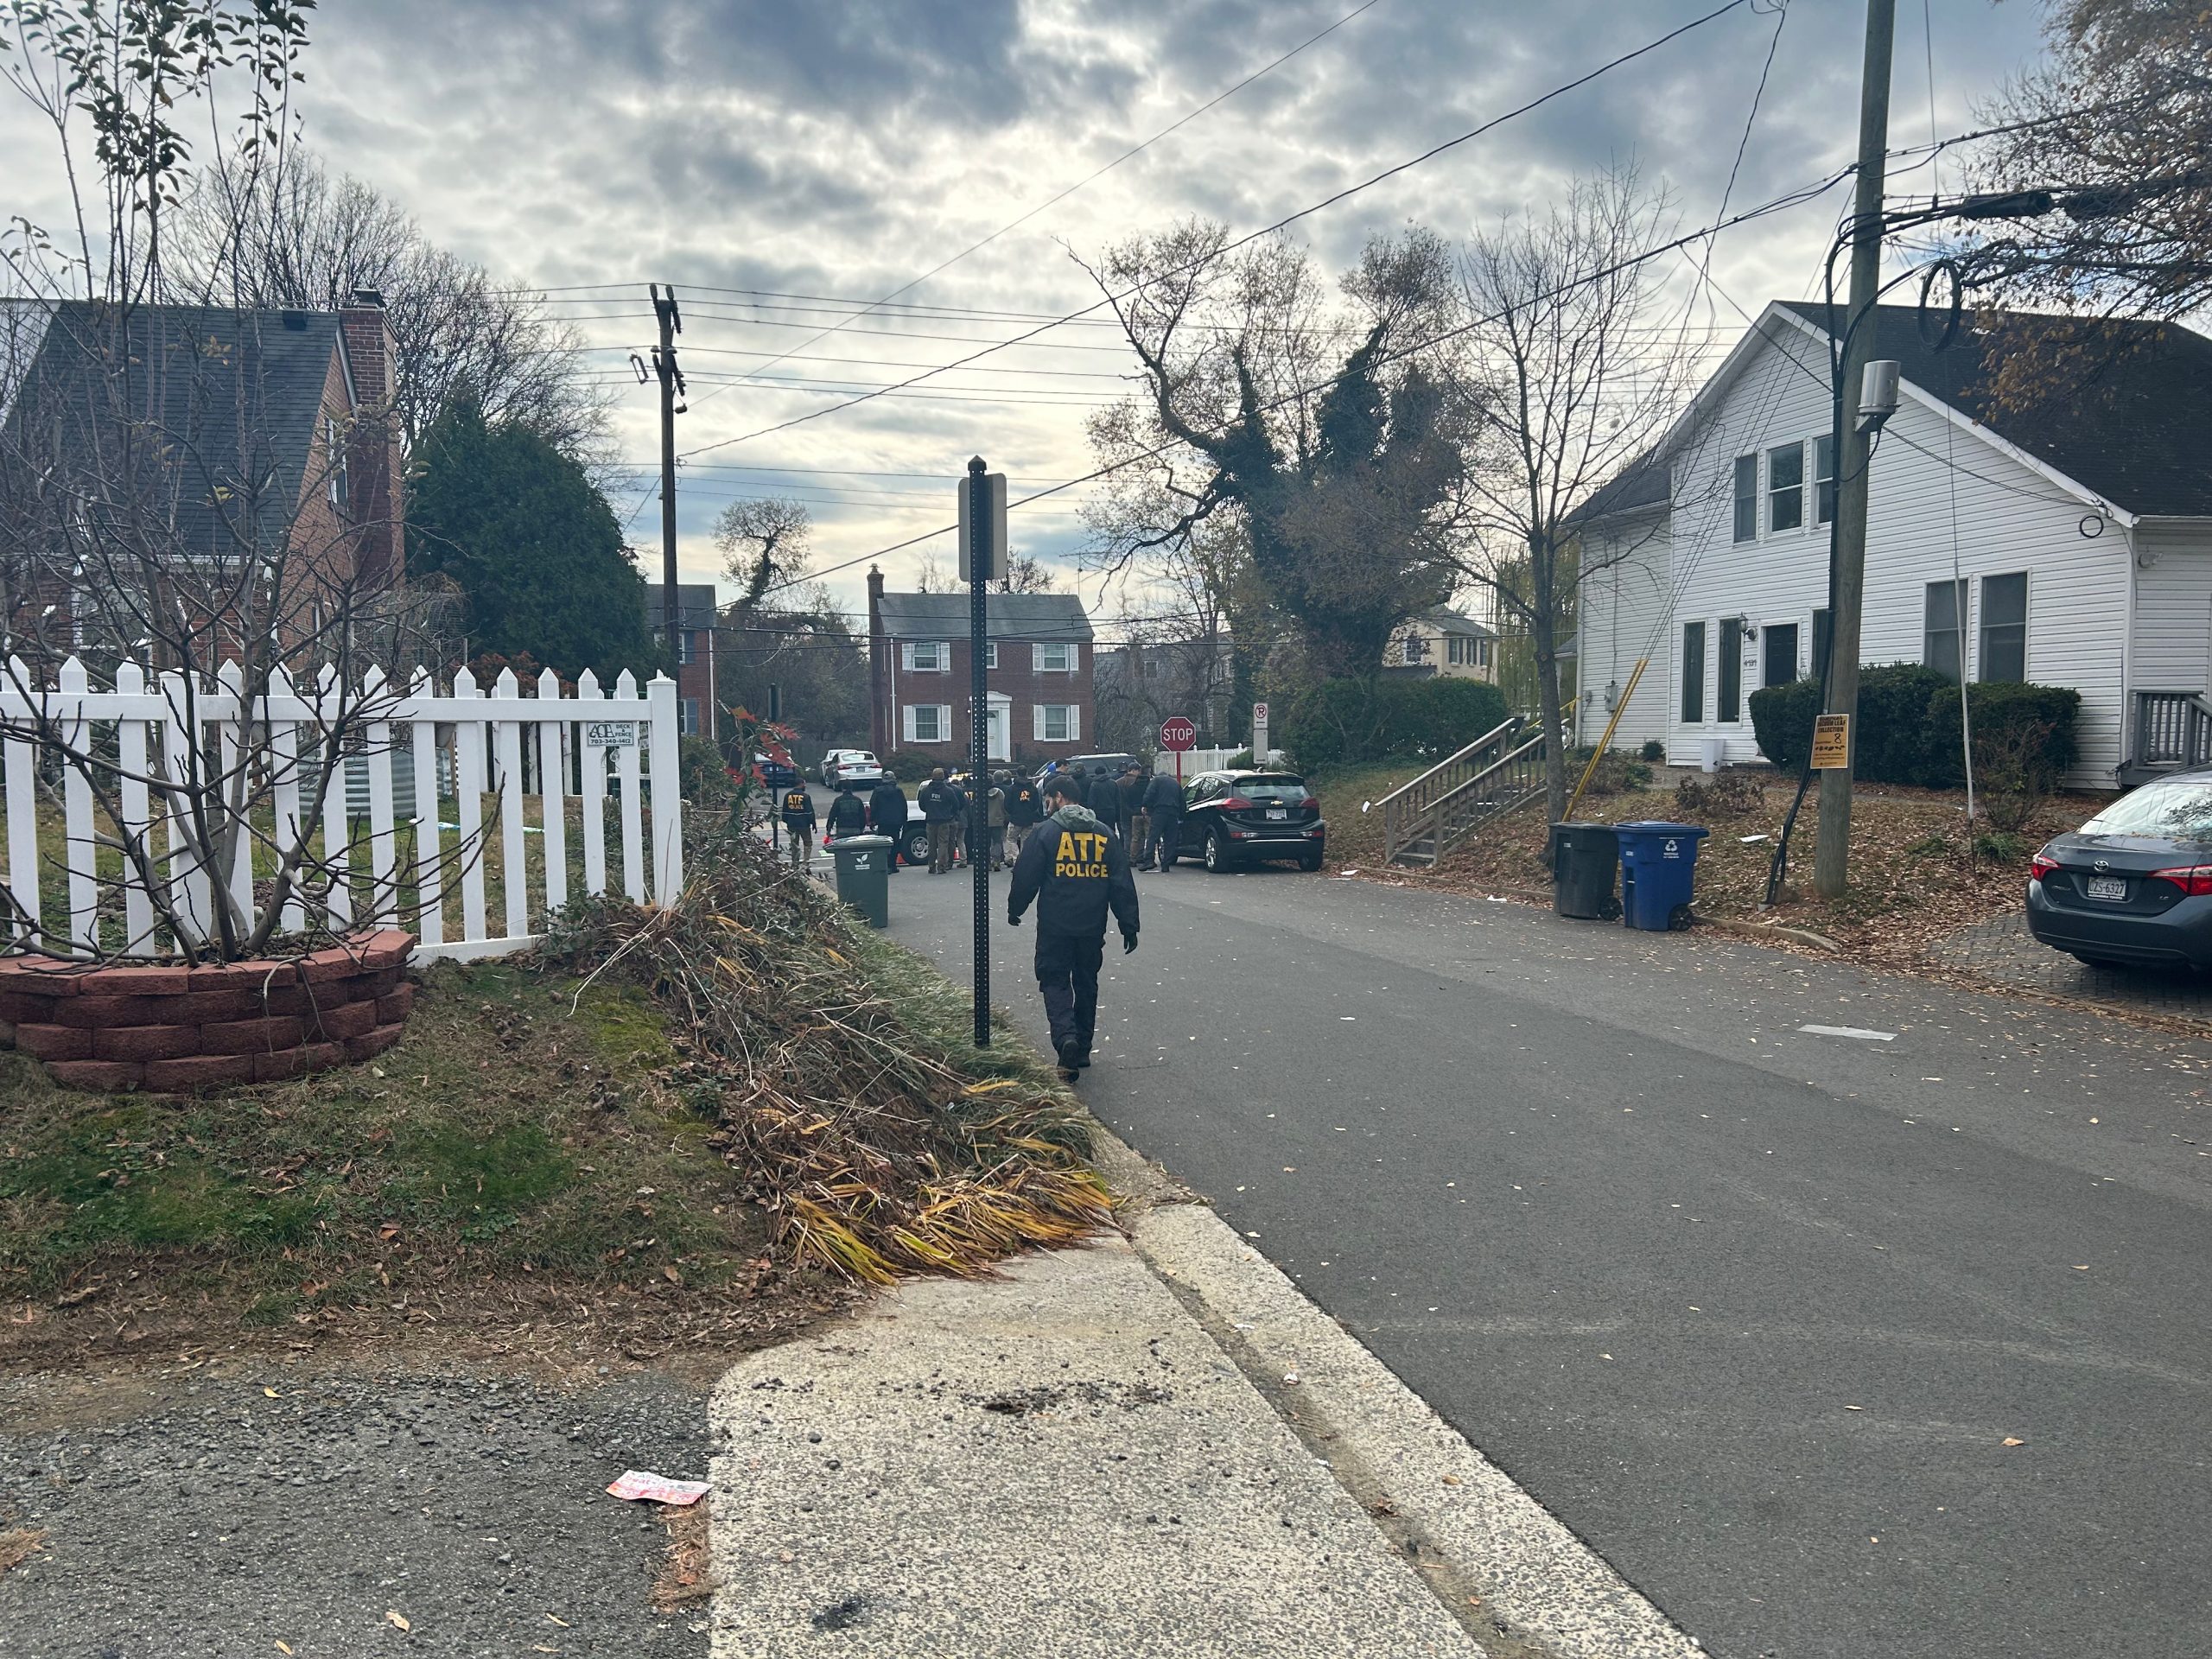 ATF and other agents survey the neighborhood